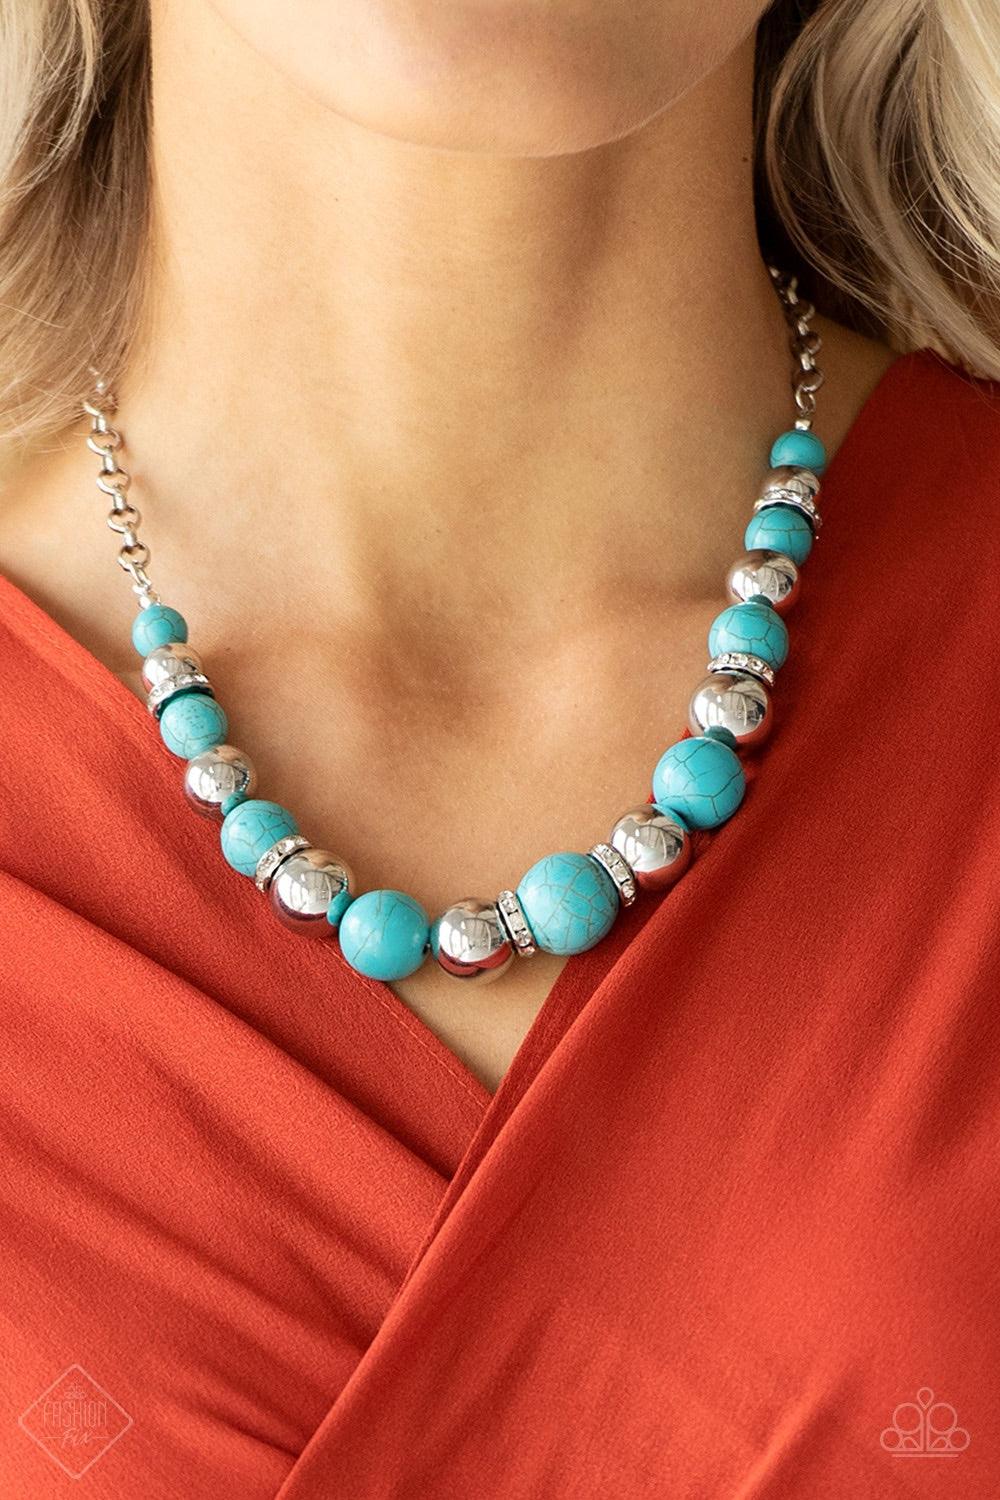 Paparazzi Accessories The Ruling Class - Blue A strand of faux turquoise stones, shiny silver beads, and white rhinestone-encrusted rings falls below the collar in a refined fashion. Features an adjustable clasp closure. Jewelry